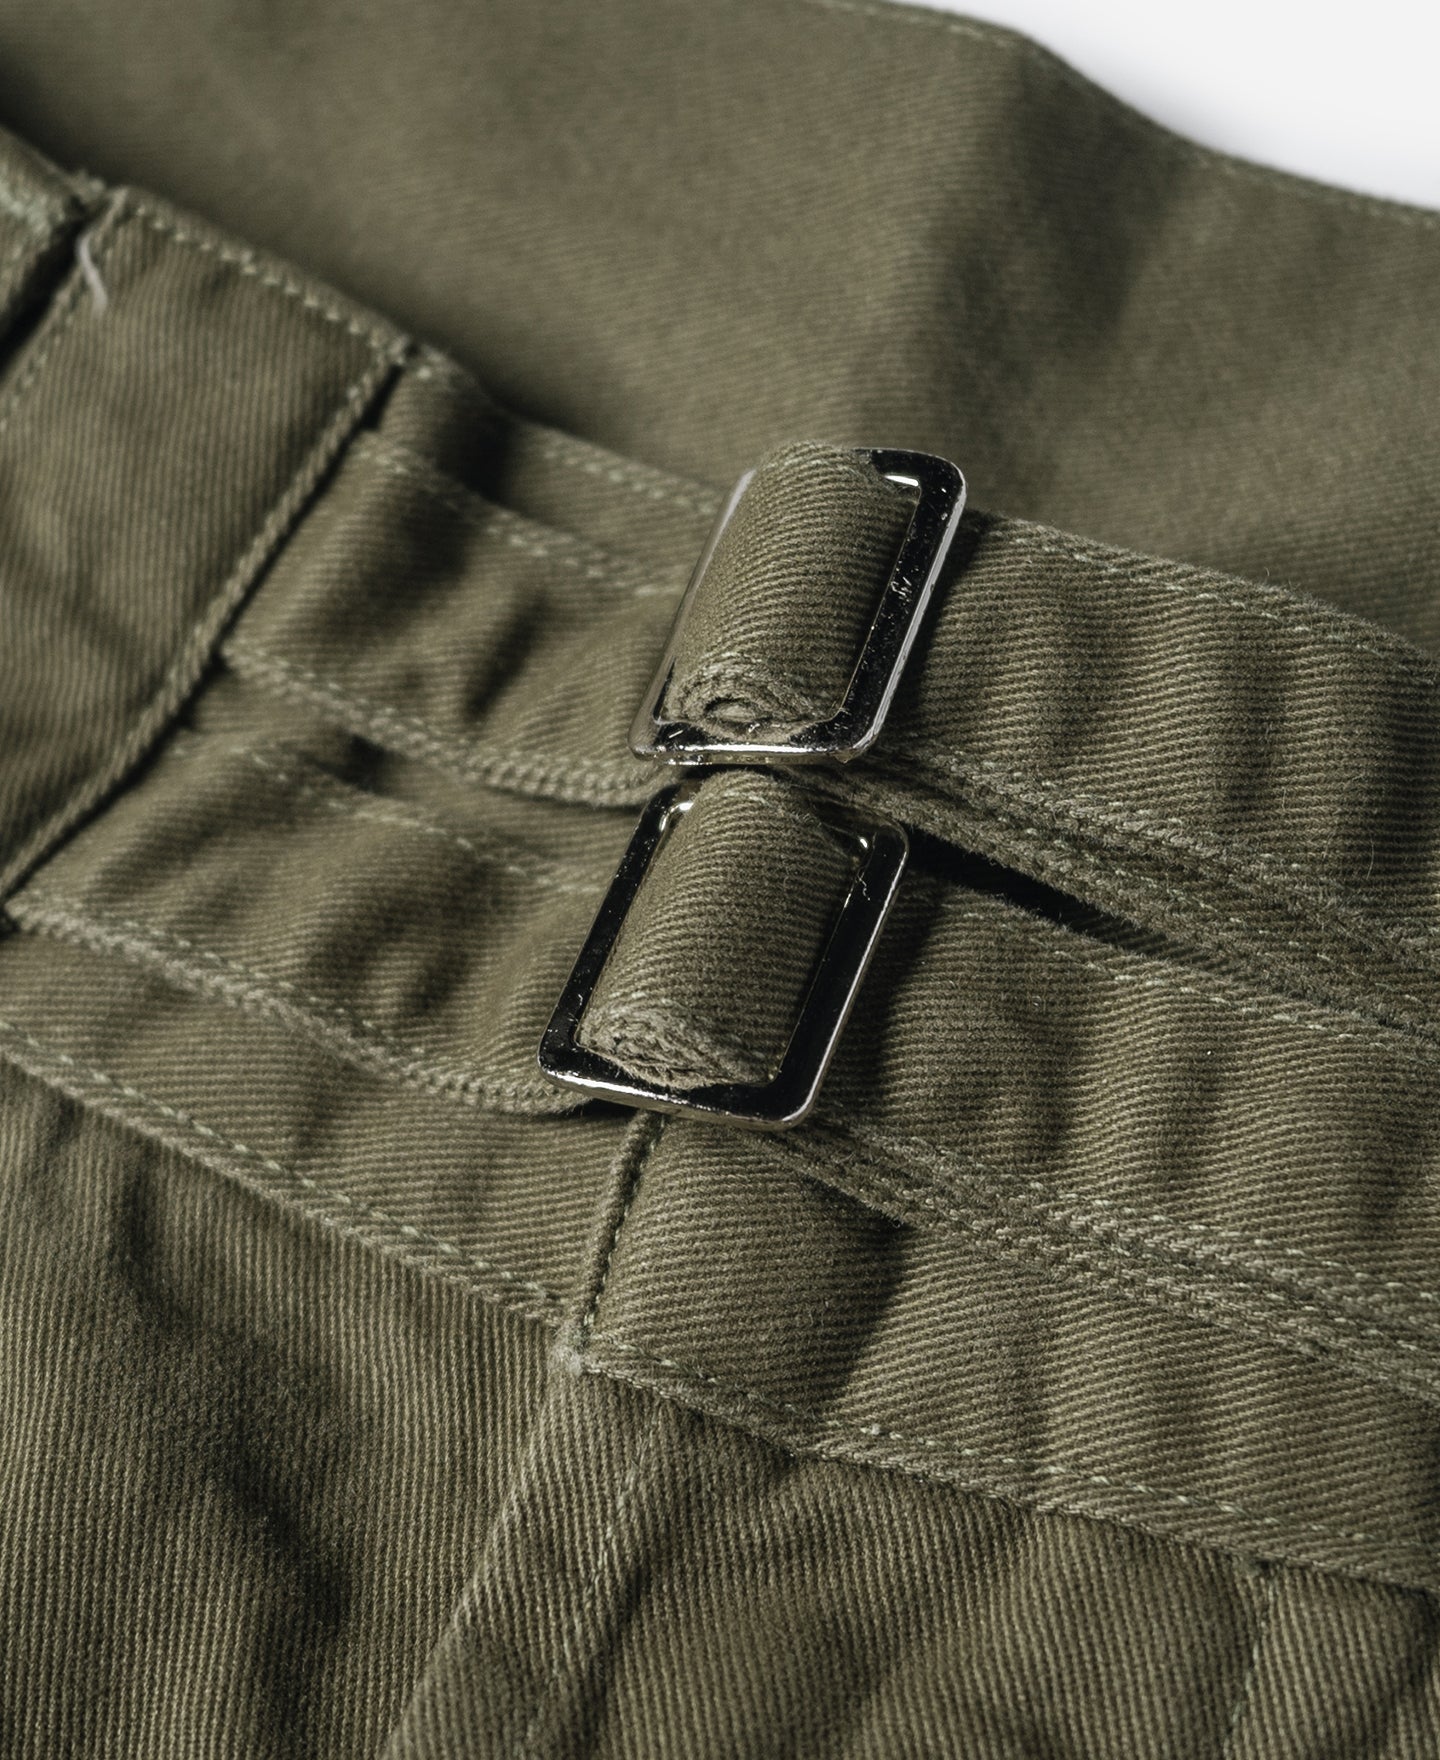 British Army Double Buckle Gurkha Trousers – Labour Union Clothing